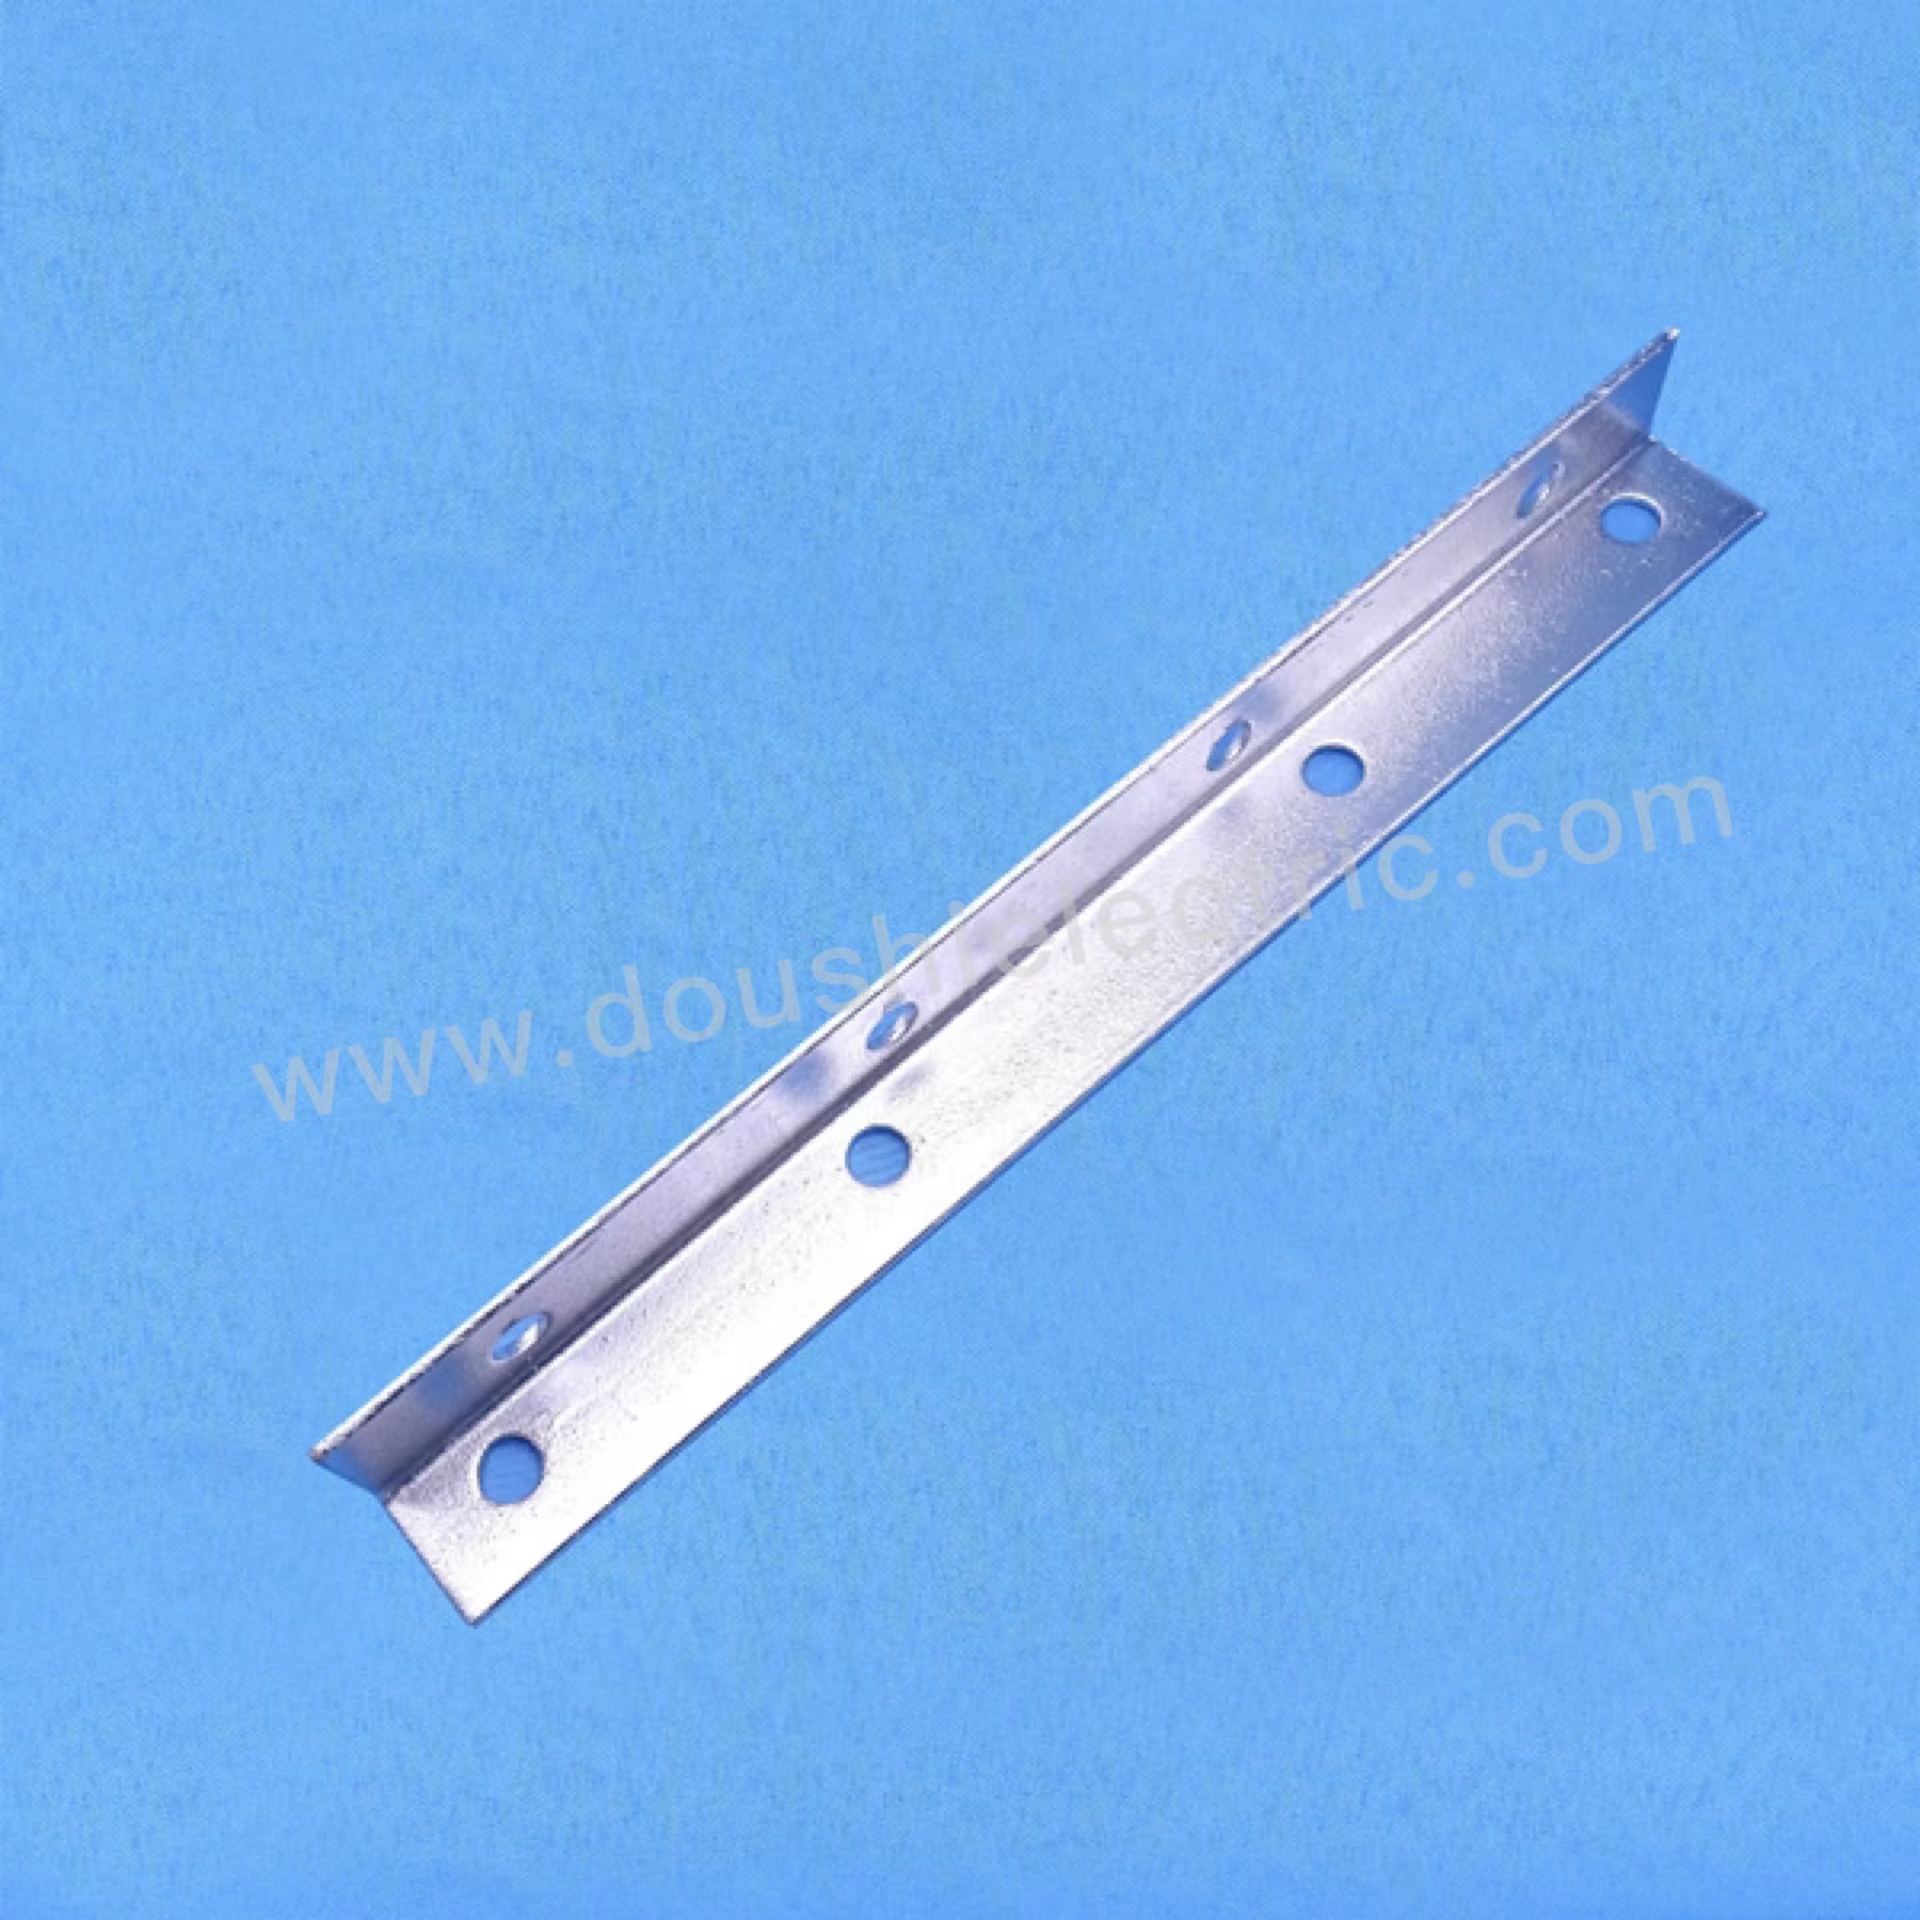 Hot Dip galvanized Cross Arms For Overhead Power Line overhead line accessories Featured Image